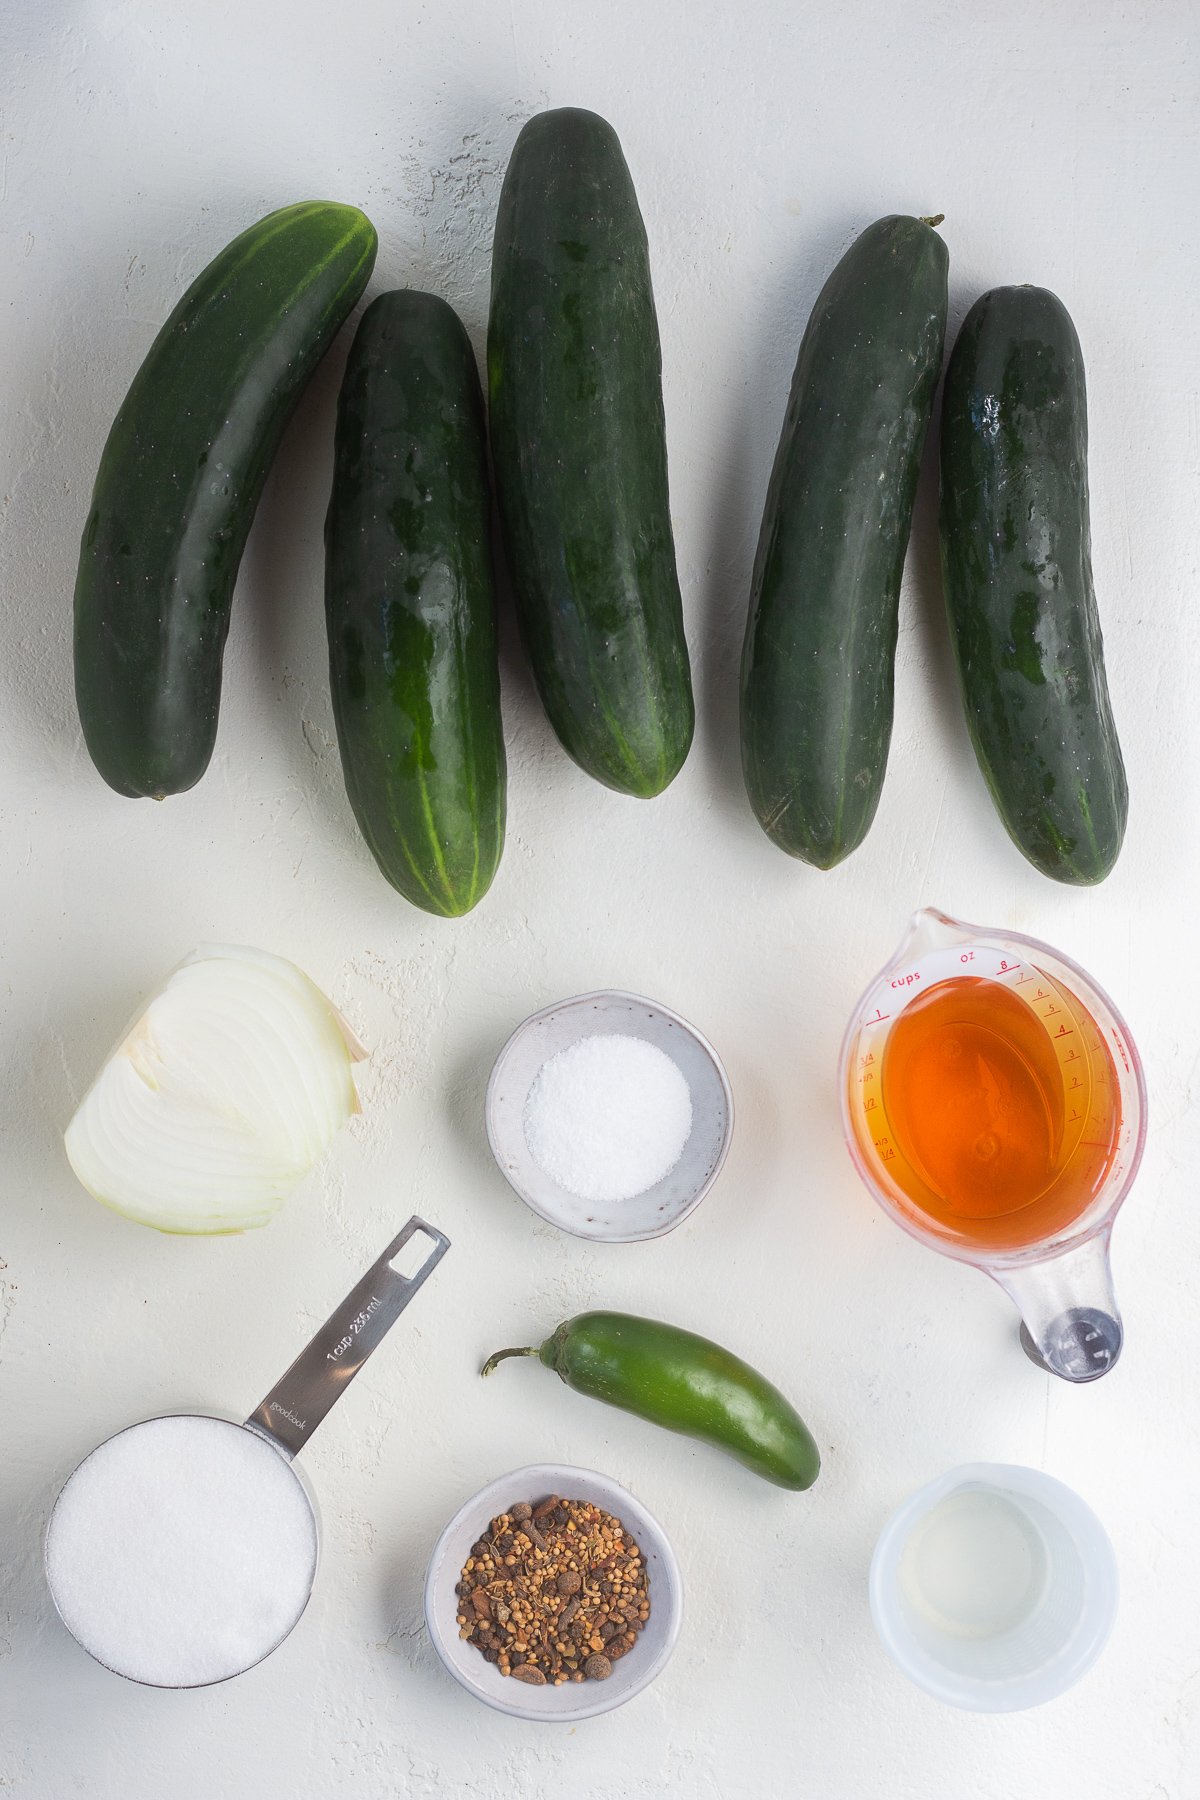 Ingredients for homemade pickles lined up on a counter.